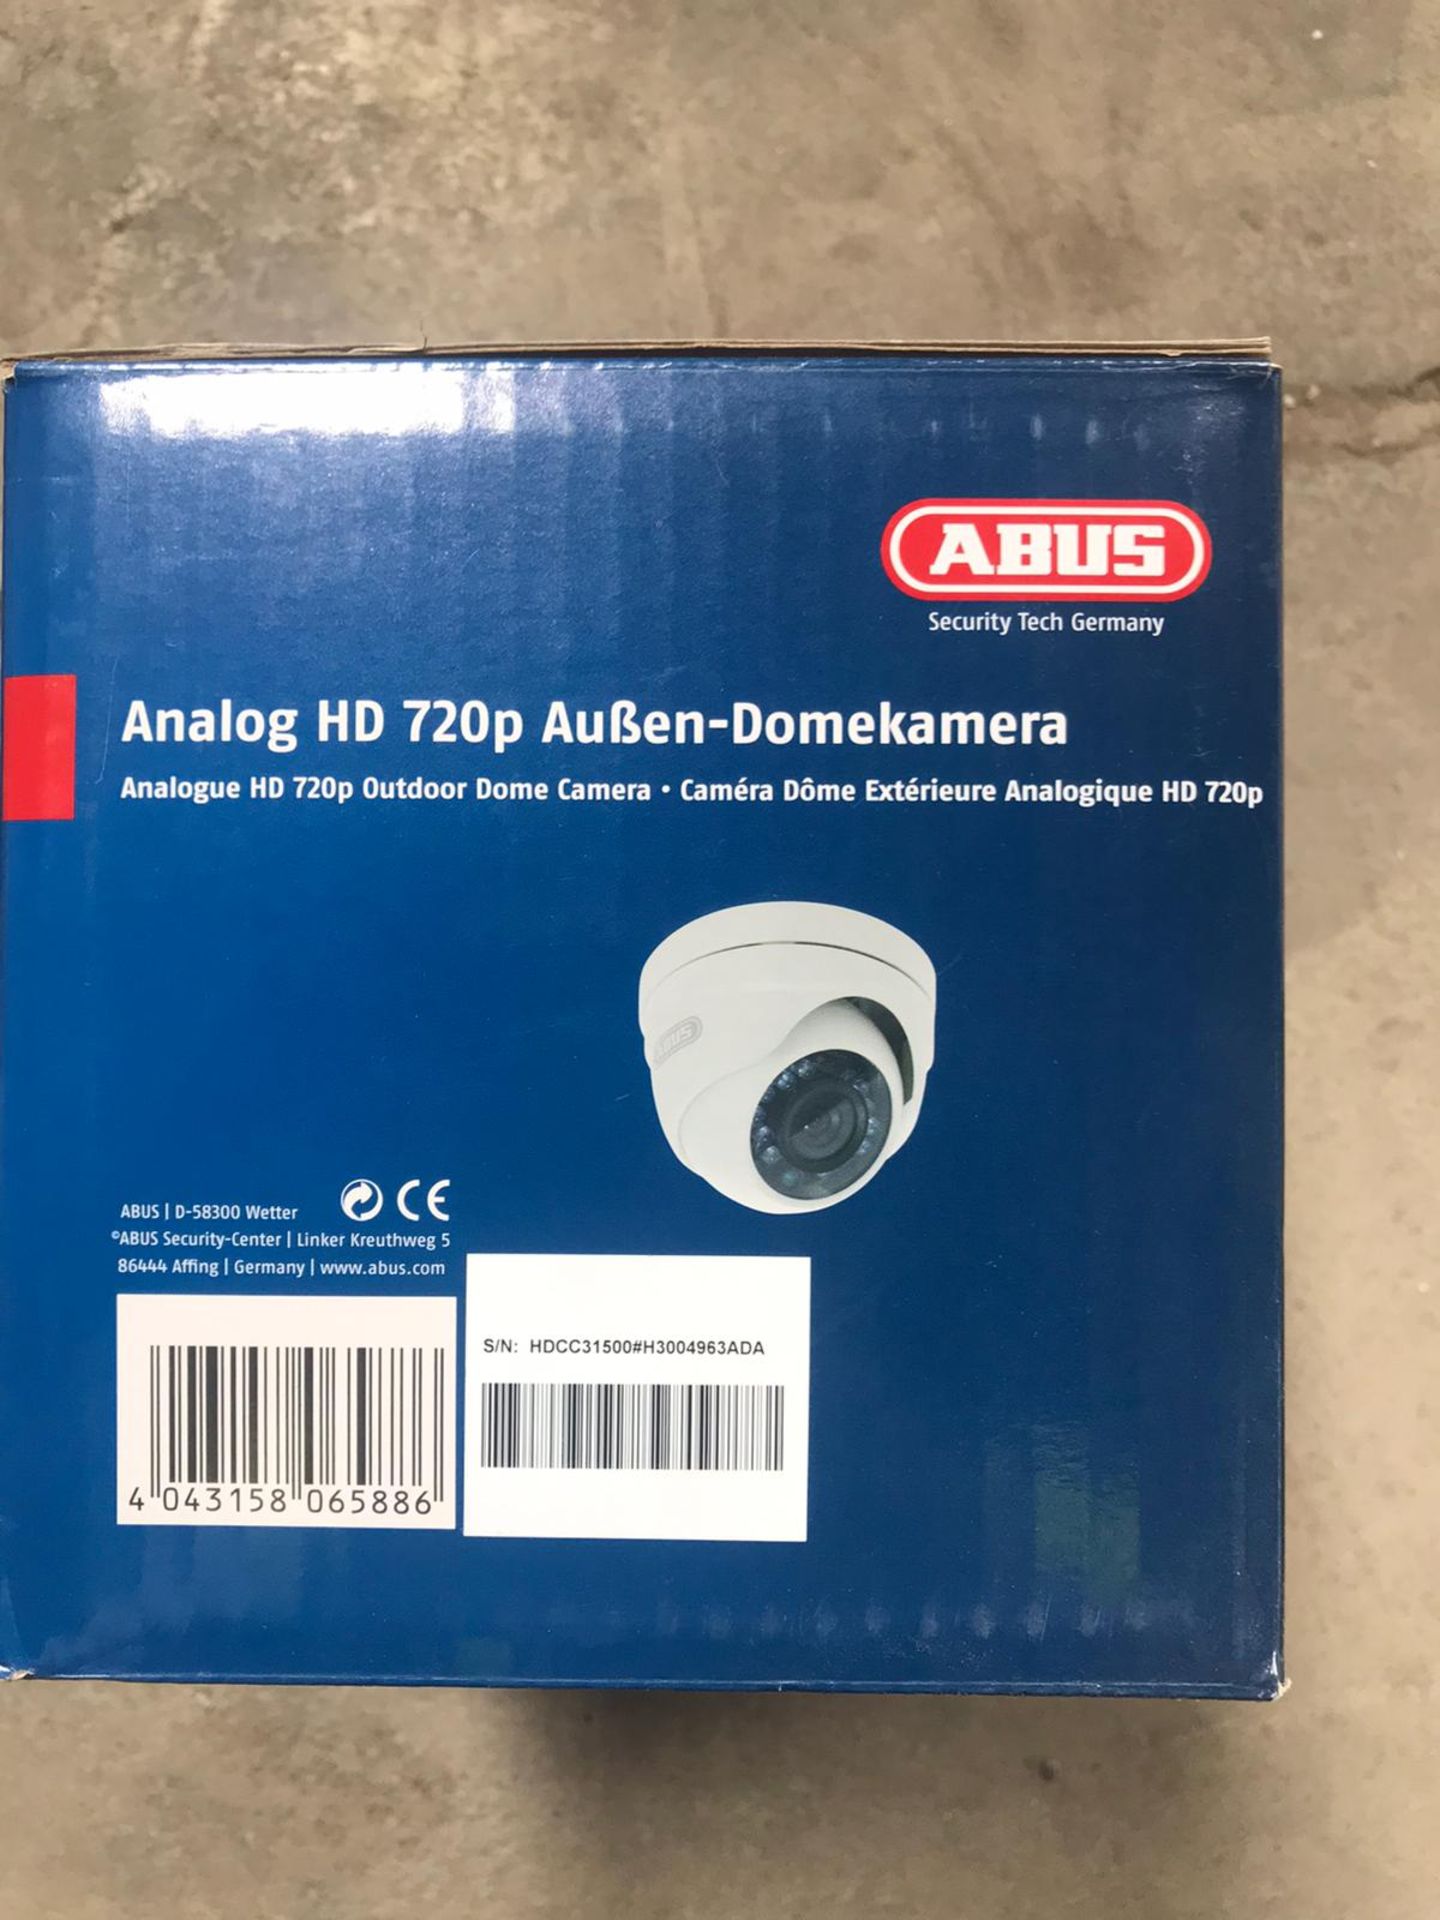 1 x Abus Analogue HD 720p Outdoor Dome Camera - New Boxed Stock - Location: Peterlee, SR8 - - Image 2 of 3